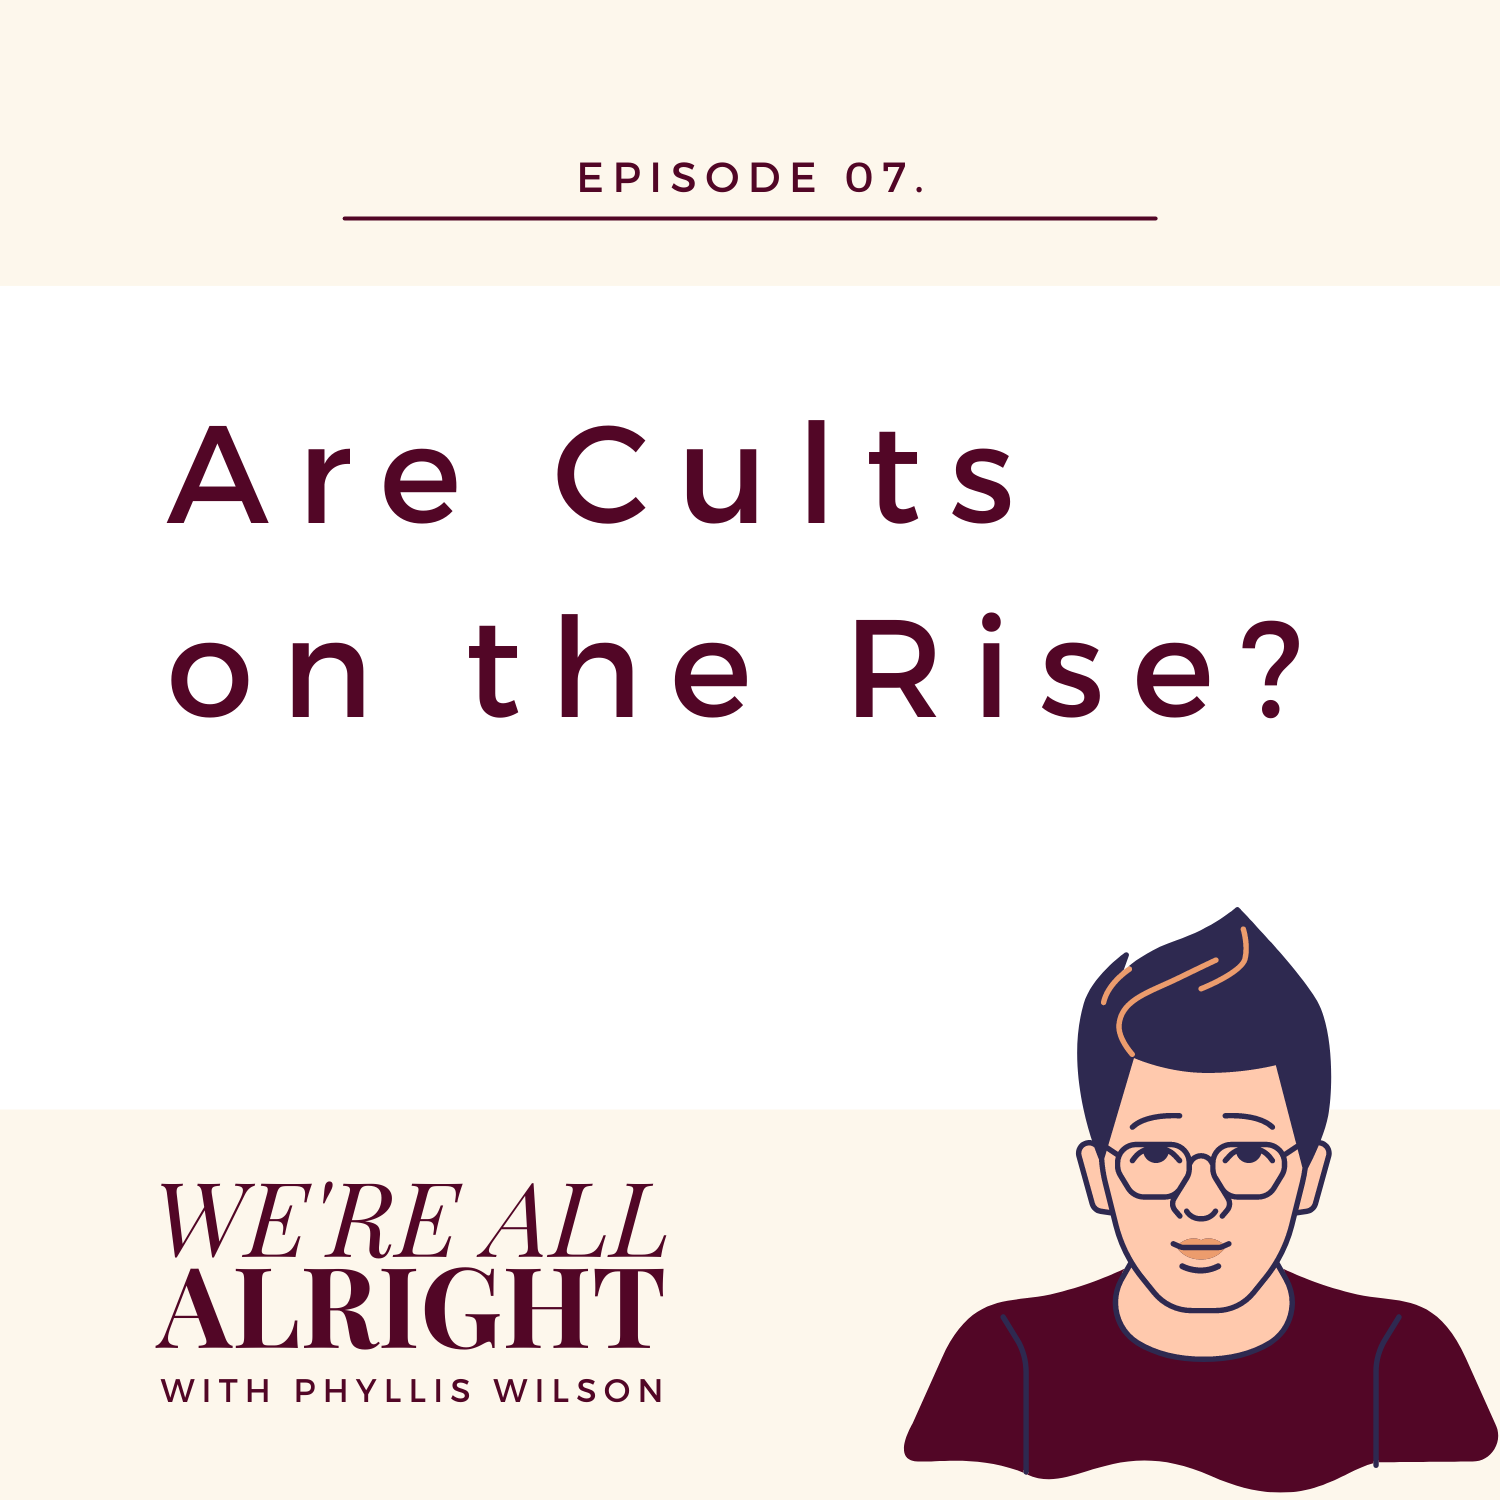 EP 07: Are Cults on the Rise?